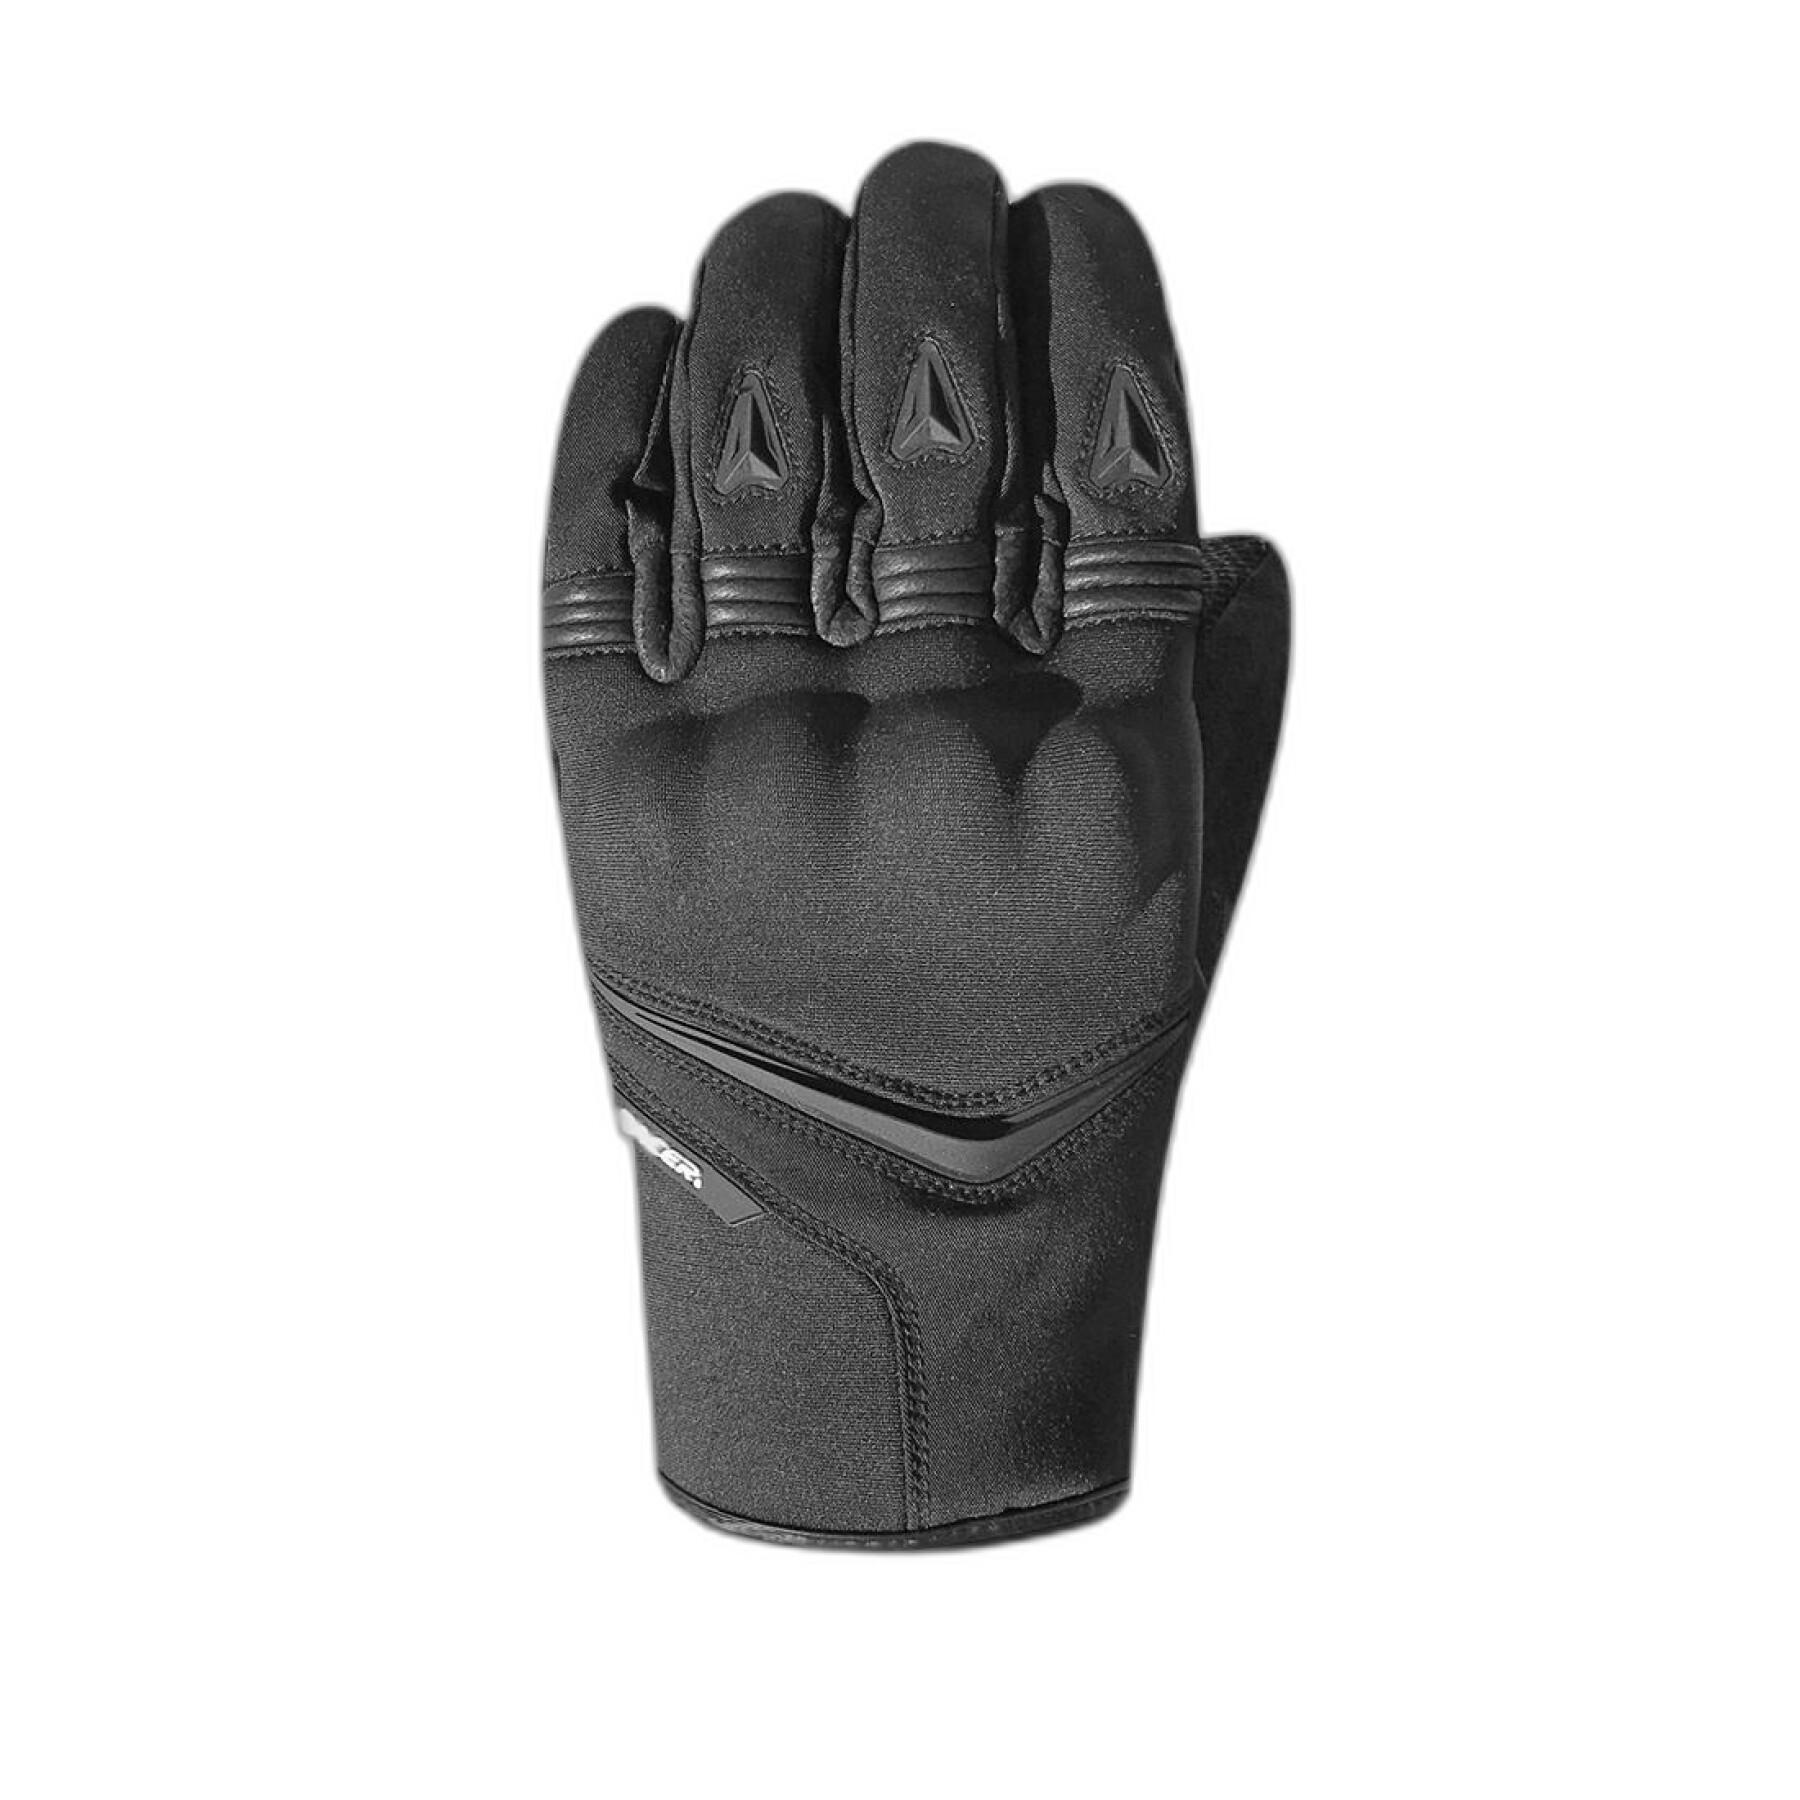 Motorcycle gloves winter textile Racer